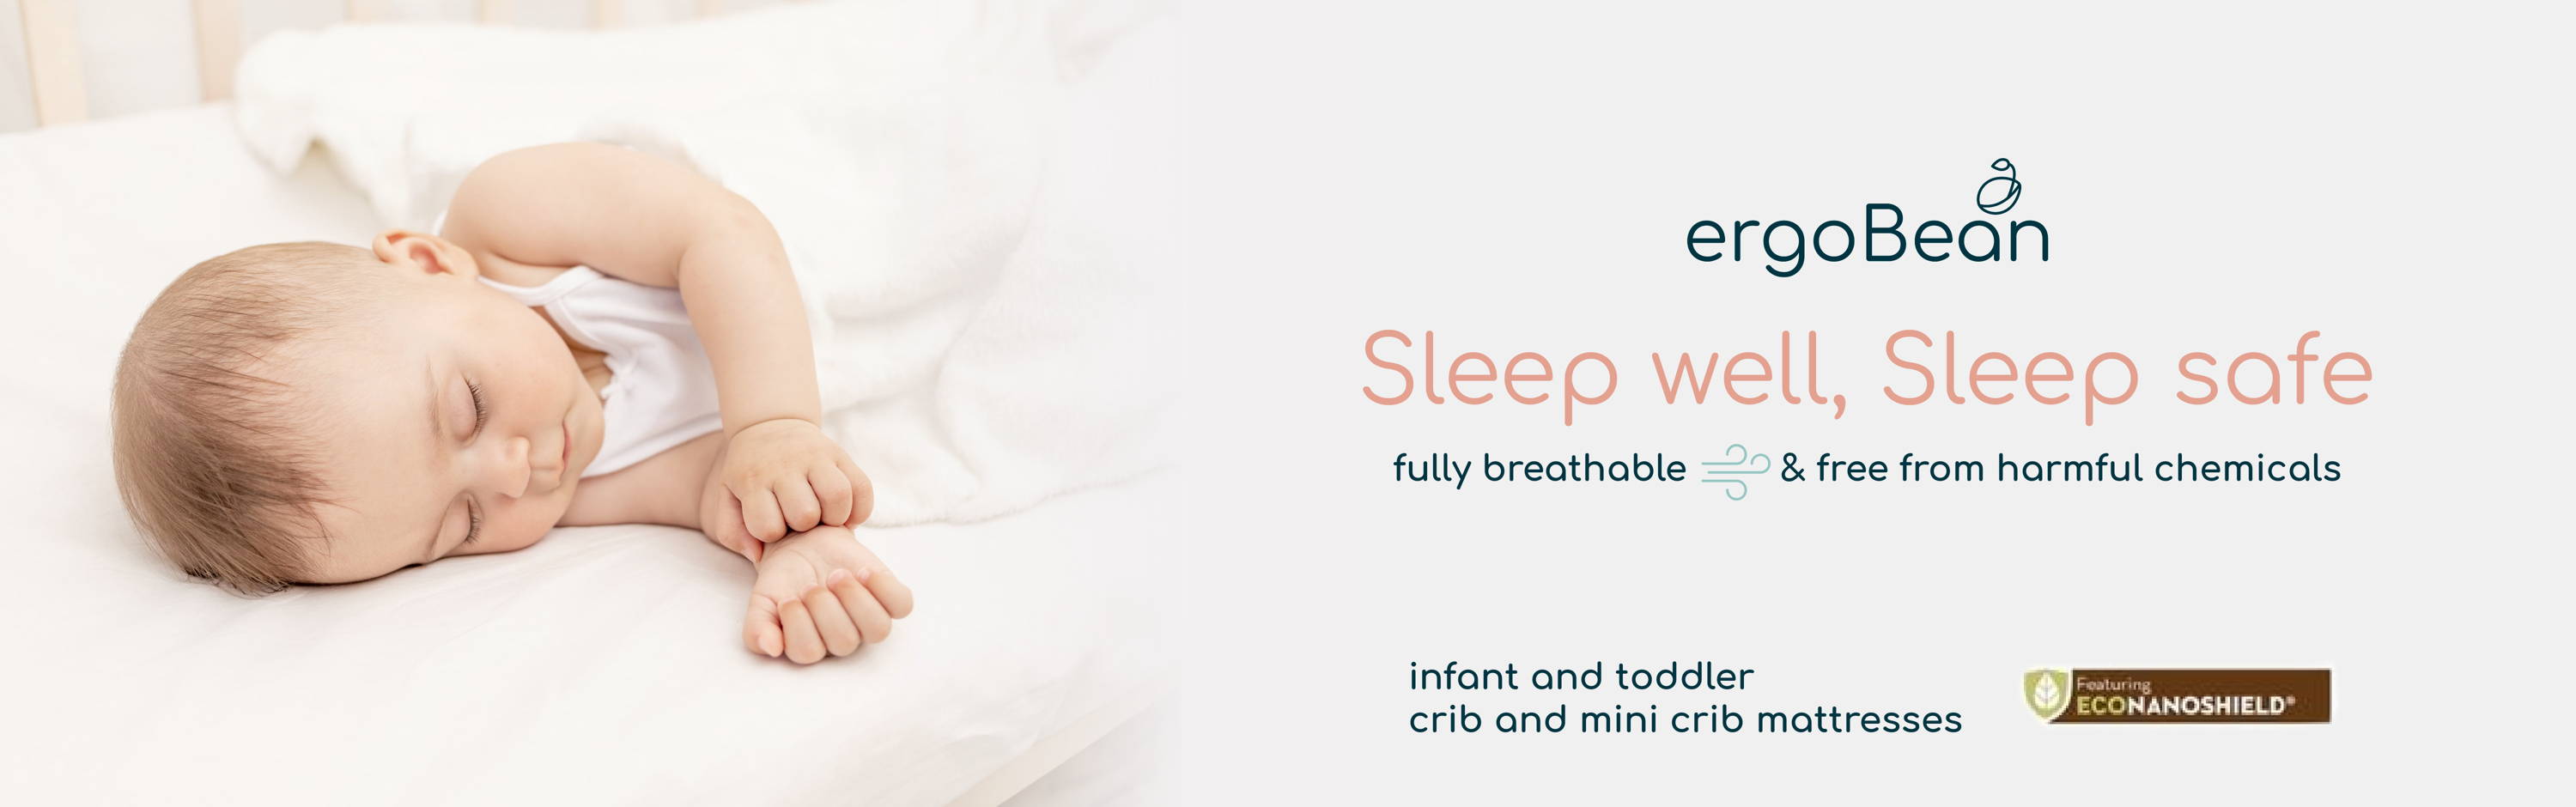 ergoBean infnat and toddler mini crib and crib mattresses that are fully breathable and free from harmful chemicals. Sleep well. Sleep Safe.